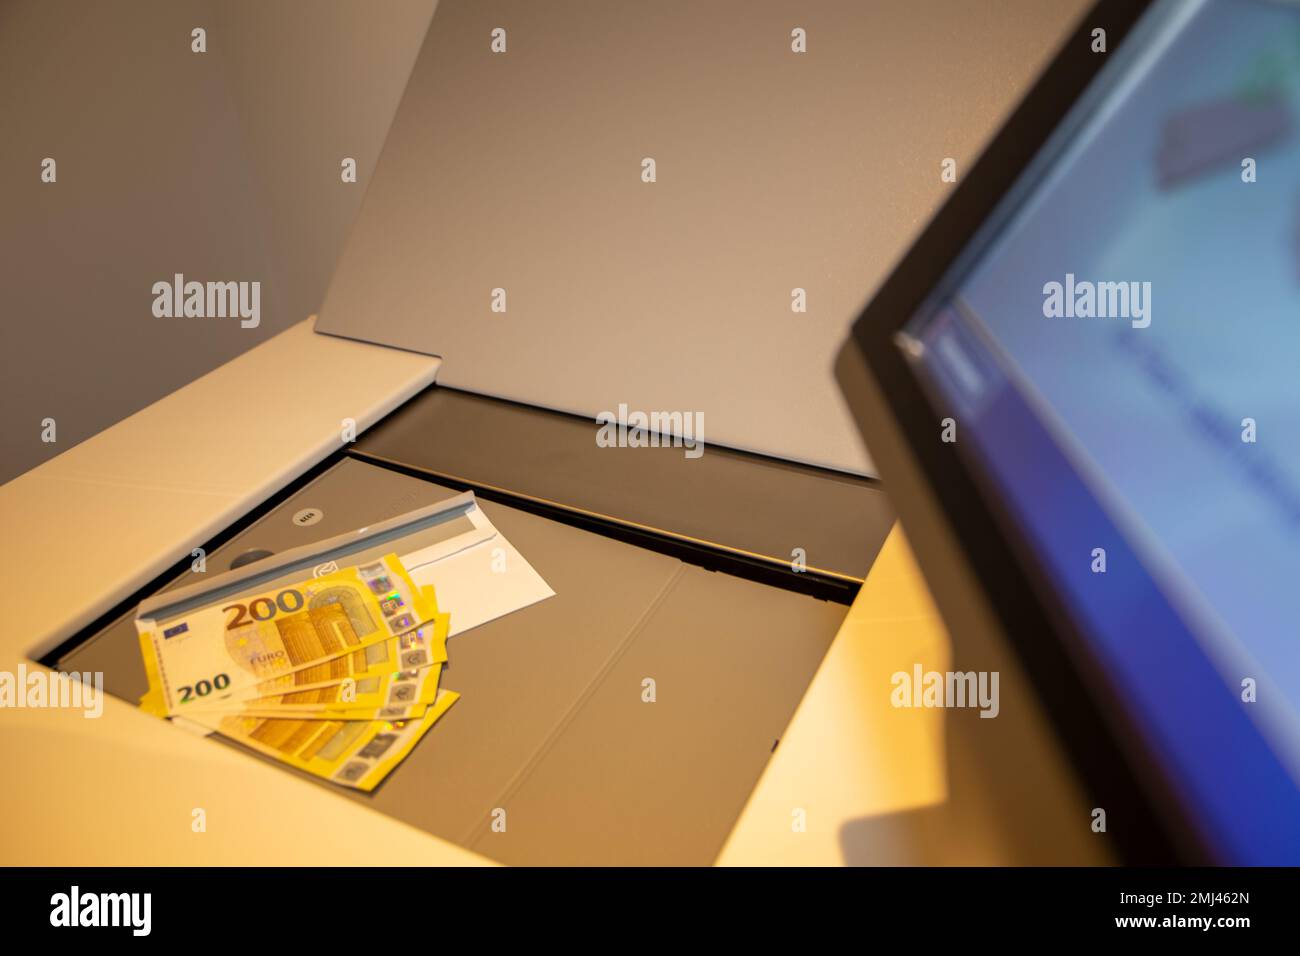 Euro banknotes in a safe deposit box Stock Photo